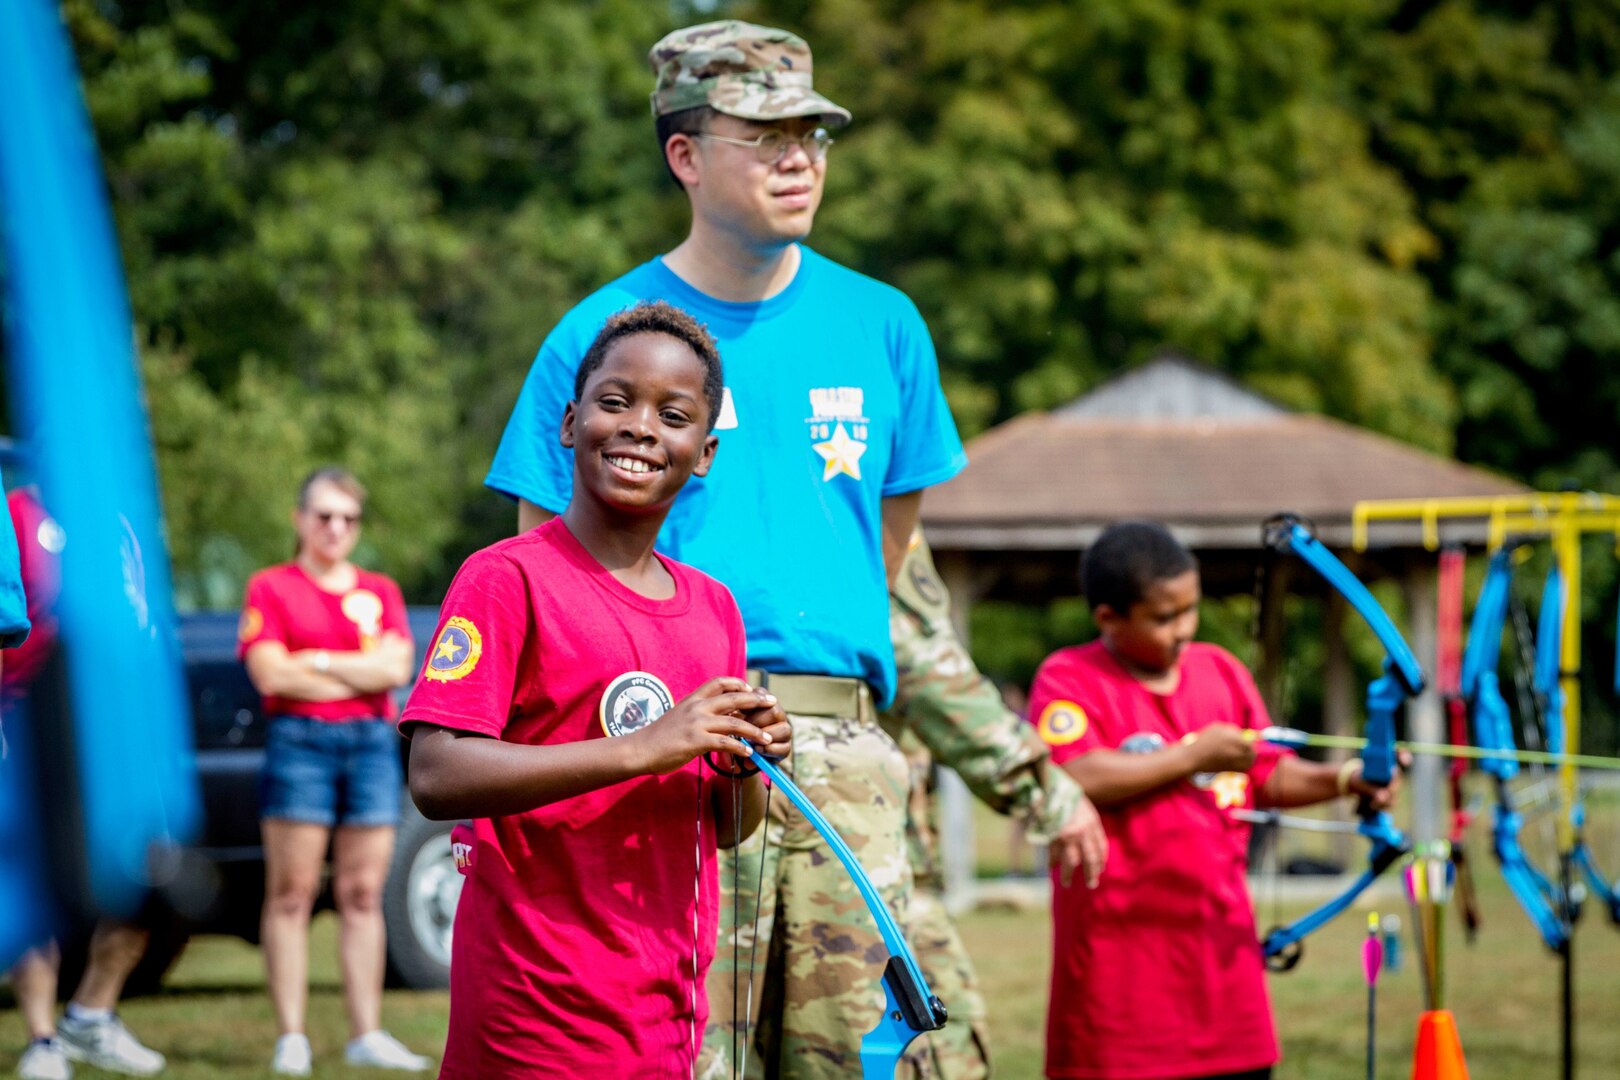 A West Virginia National Guard Solider watches as a participant of the Gold Star Families retreat takes part in an archery event Sept. 28, 2019, at Camp Dawson, W.Va. The Gold Star Families retreat is hosted each year by the WVNG to honor the service and sacrifice of Gold Star Families - those who have lost a family member in military service. (U.S. Army National Guard photo by Sgt. Zoe Morris)